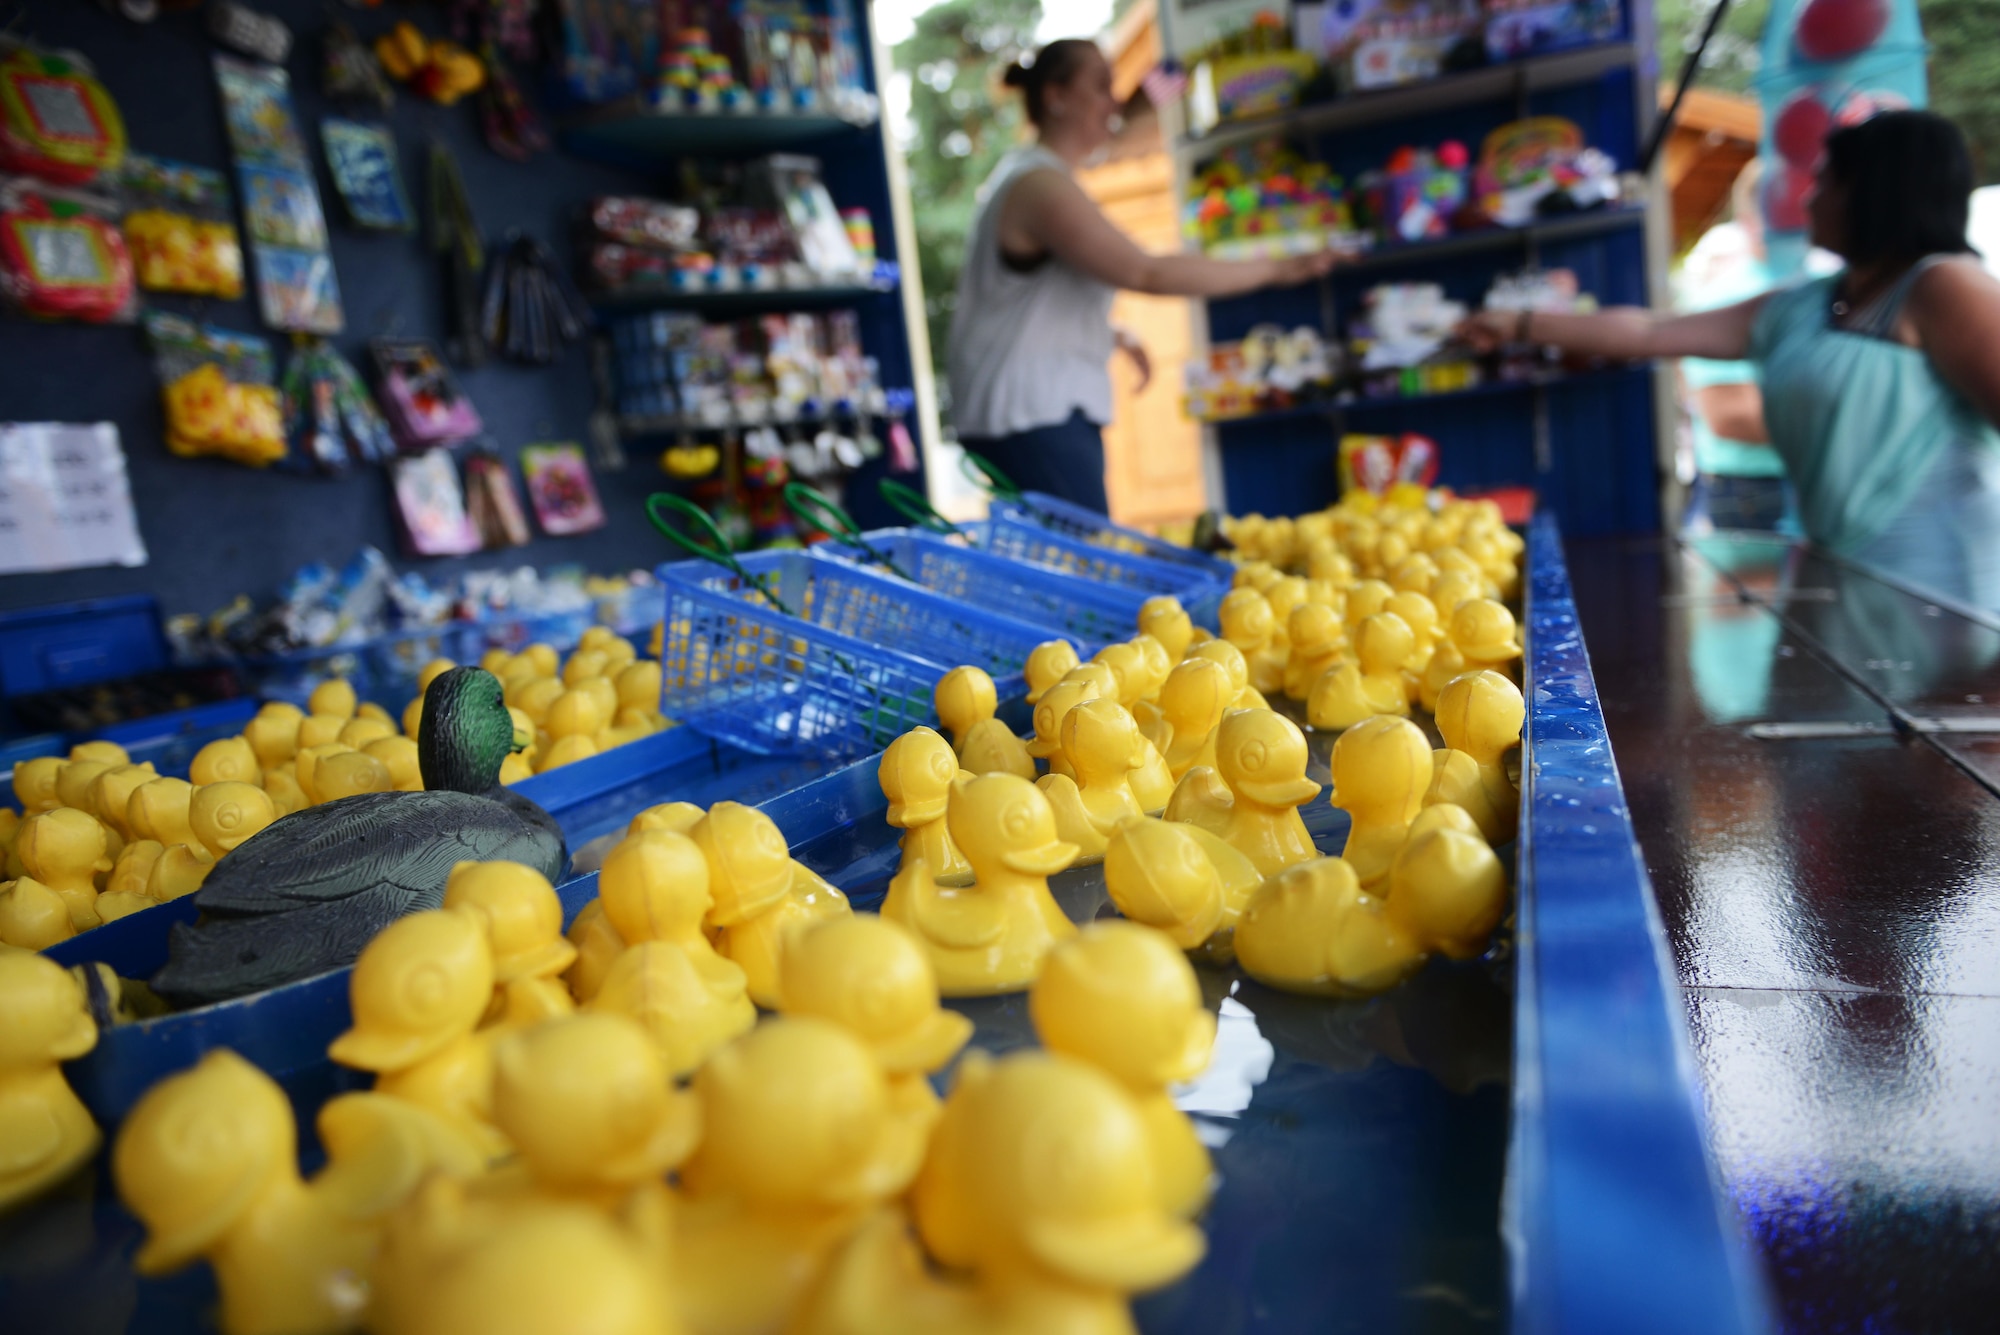 Rubber ducks float in the water at a kiosk during the Freedom Fest 2016 at Ramstein Air Base, Germany, July 4, 2016. The Independence Day celebration included a variety of foods, games, rides and fireworks for Kaiserslautern Military Community members. (U.S. Air Force Photo/ Airman 1st Class Joshua Magbanua)